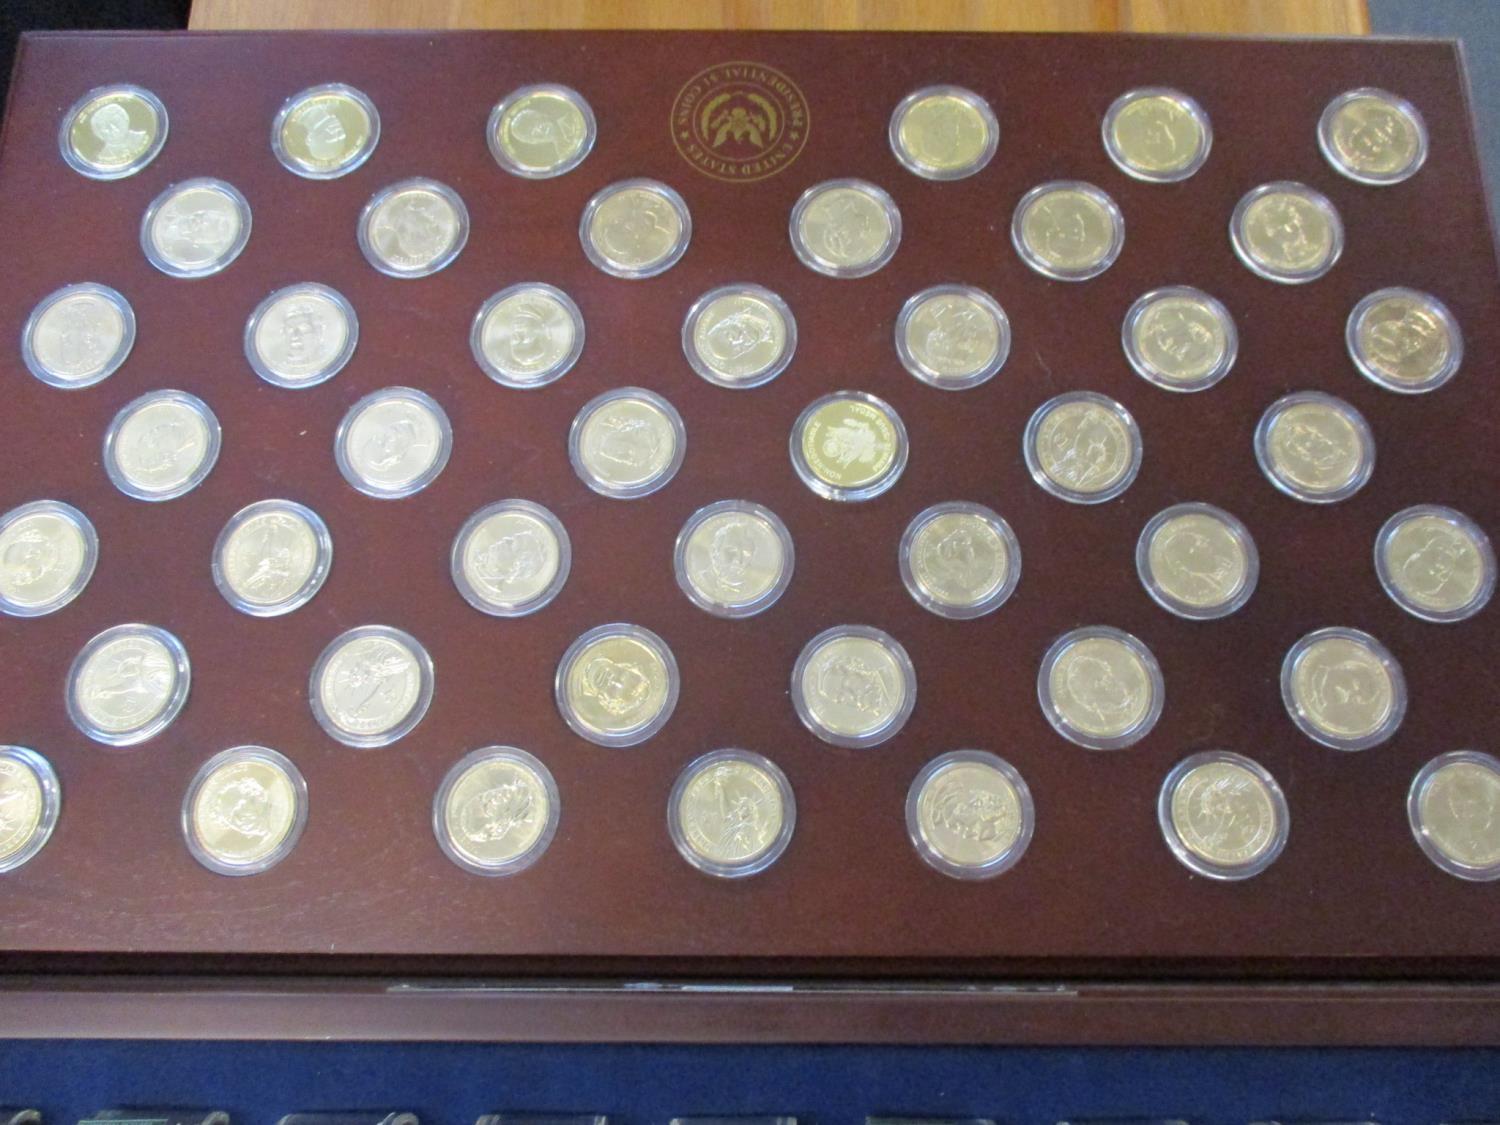 A United States Presidential Coins contained in a mahogany finished case - Image 2 of 3